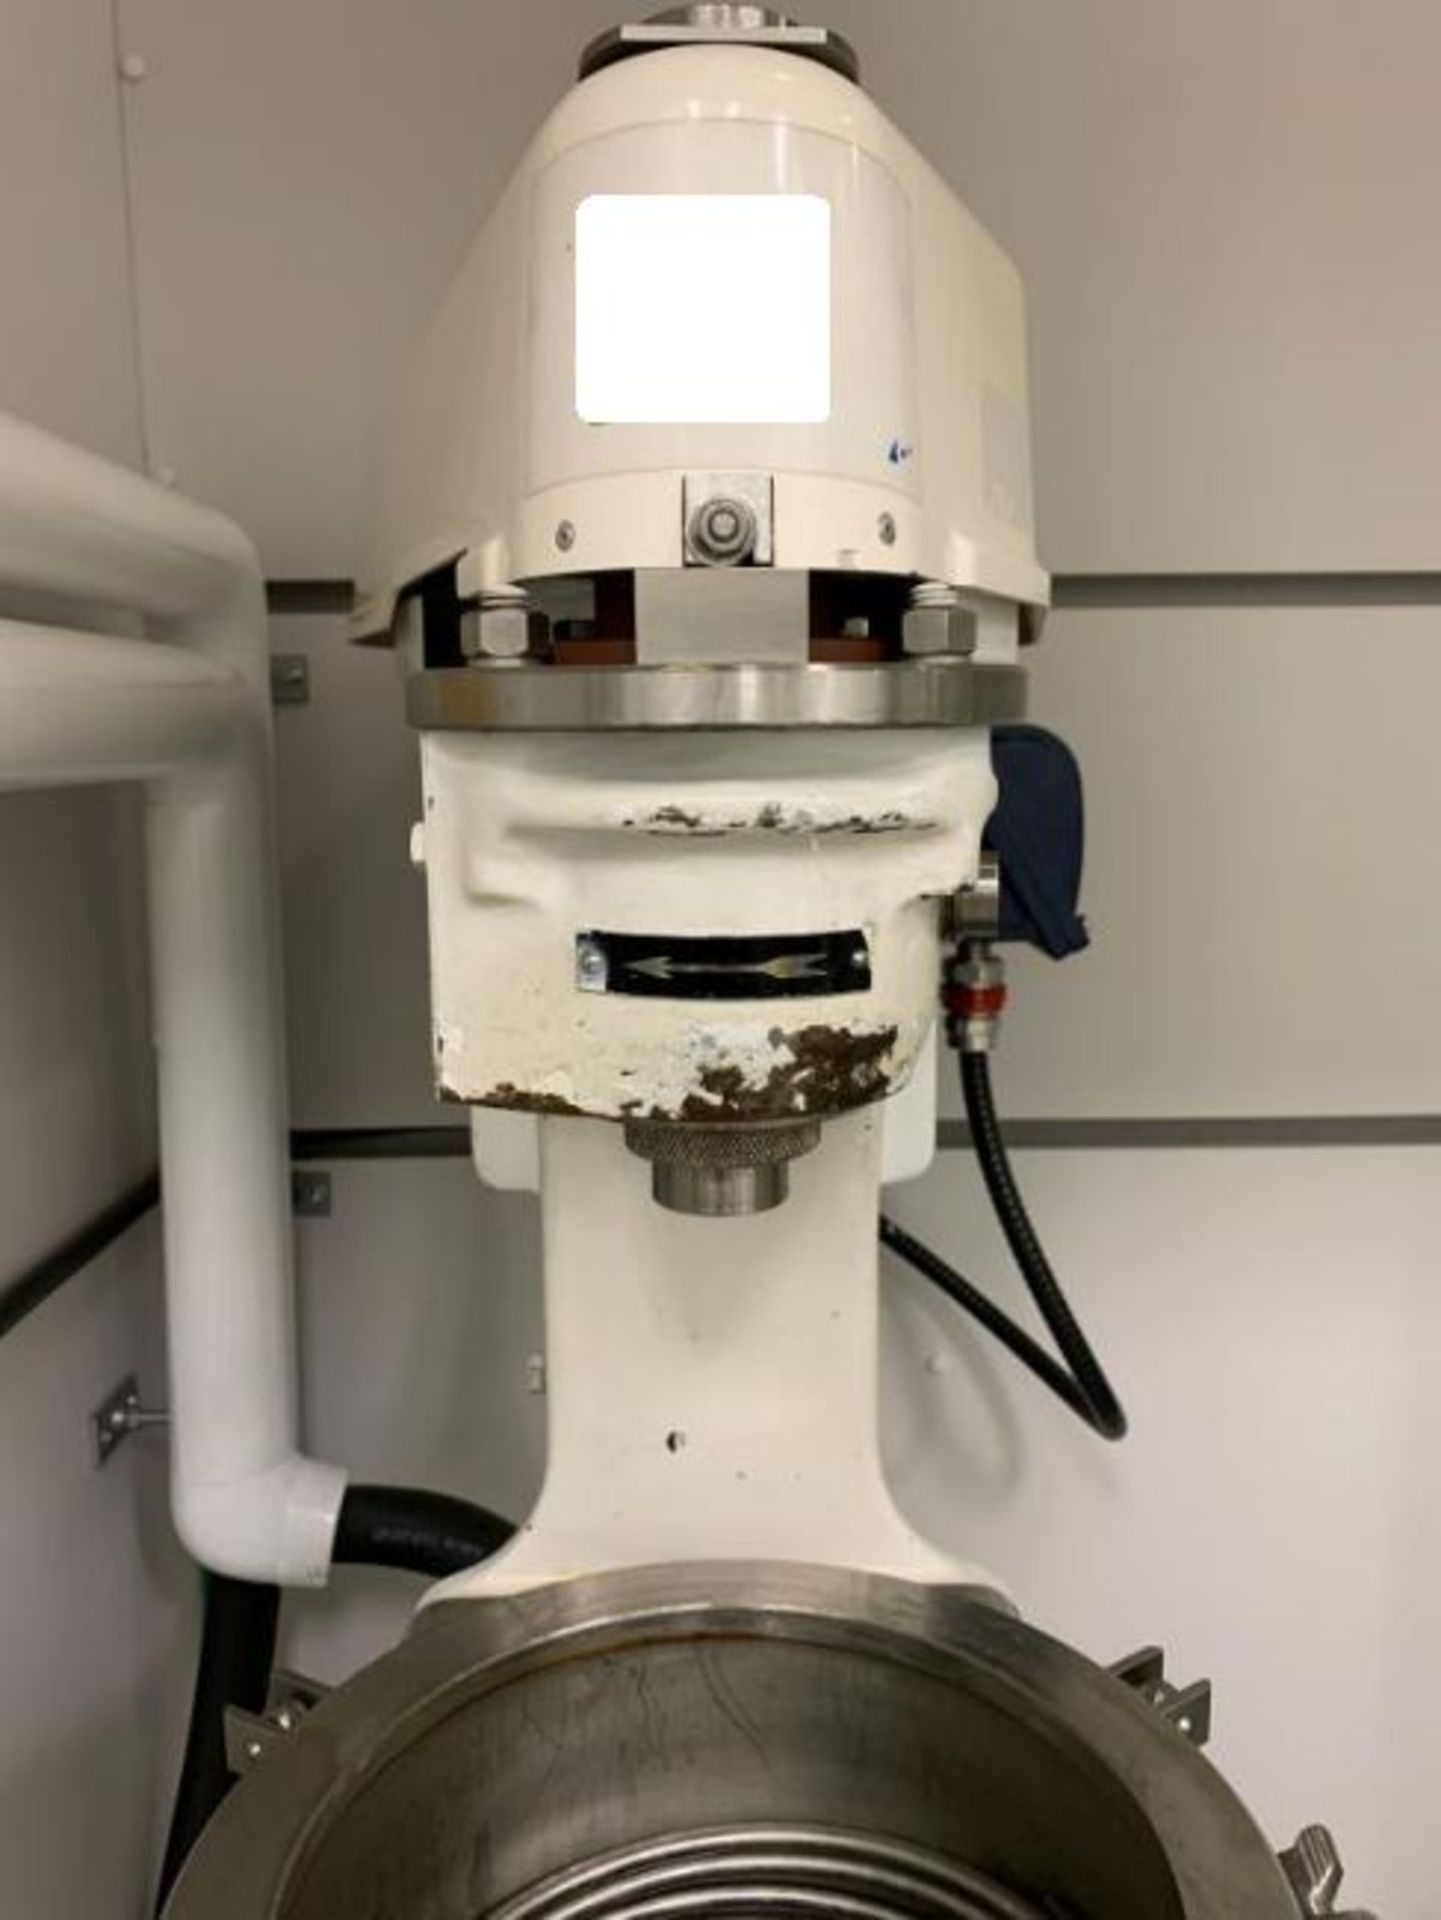 Sharples vaporite super centrifuge, model AS16VB, stainless steel construction, 17000 RPM max speed, - Image 7 of 20